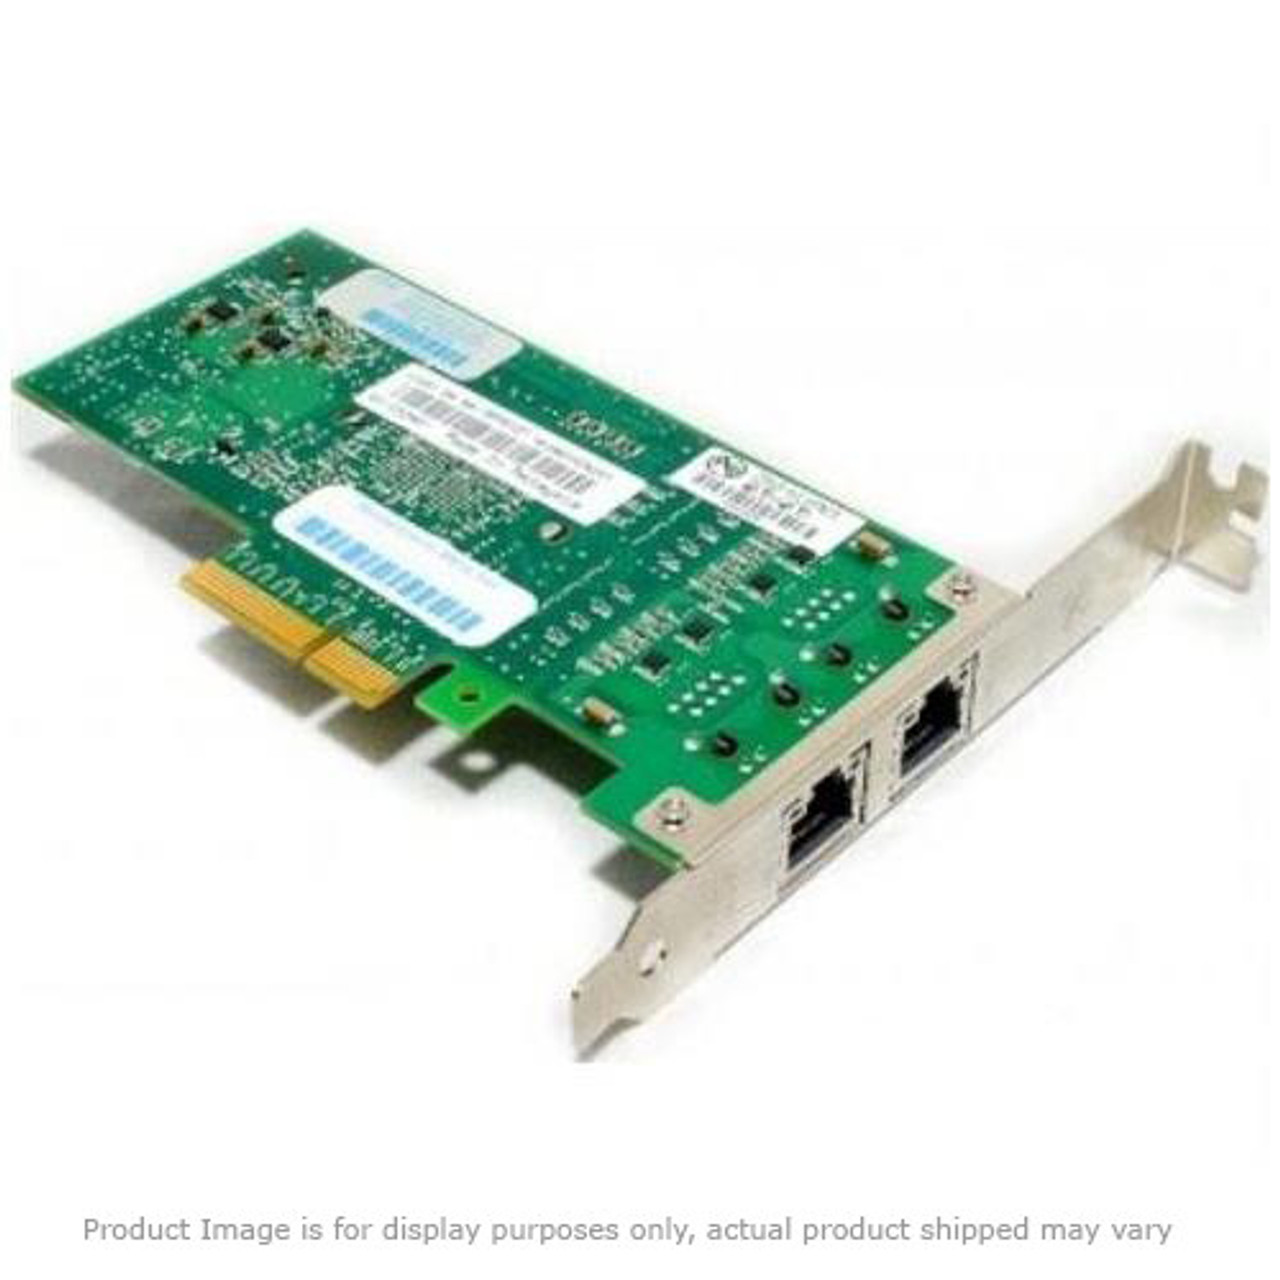 3C905T4 3Com Fast EtherLink XL T4 PCI Network Interface Card